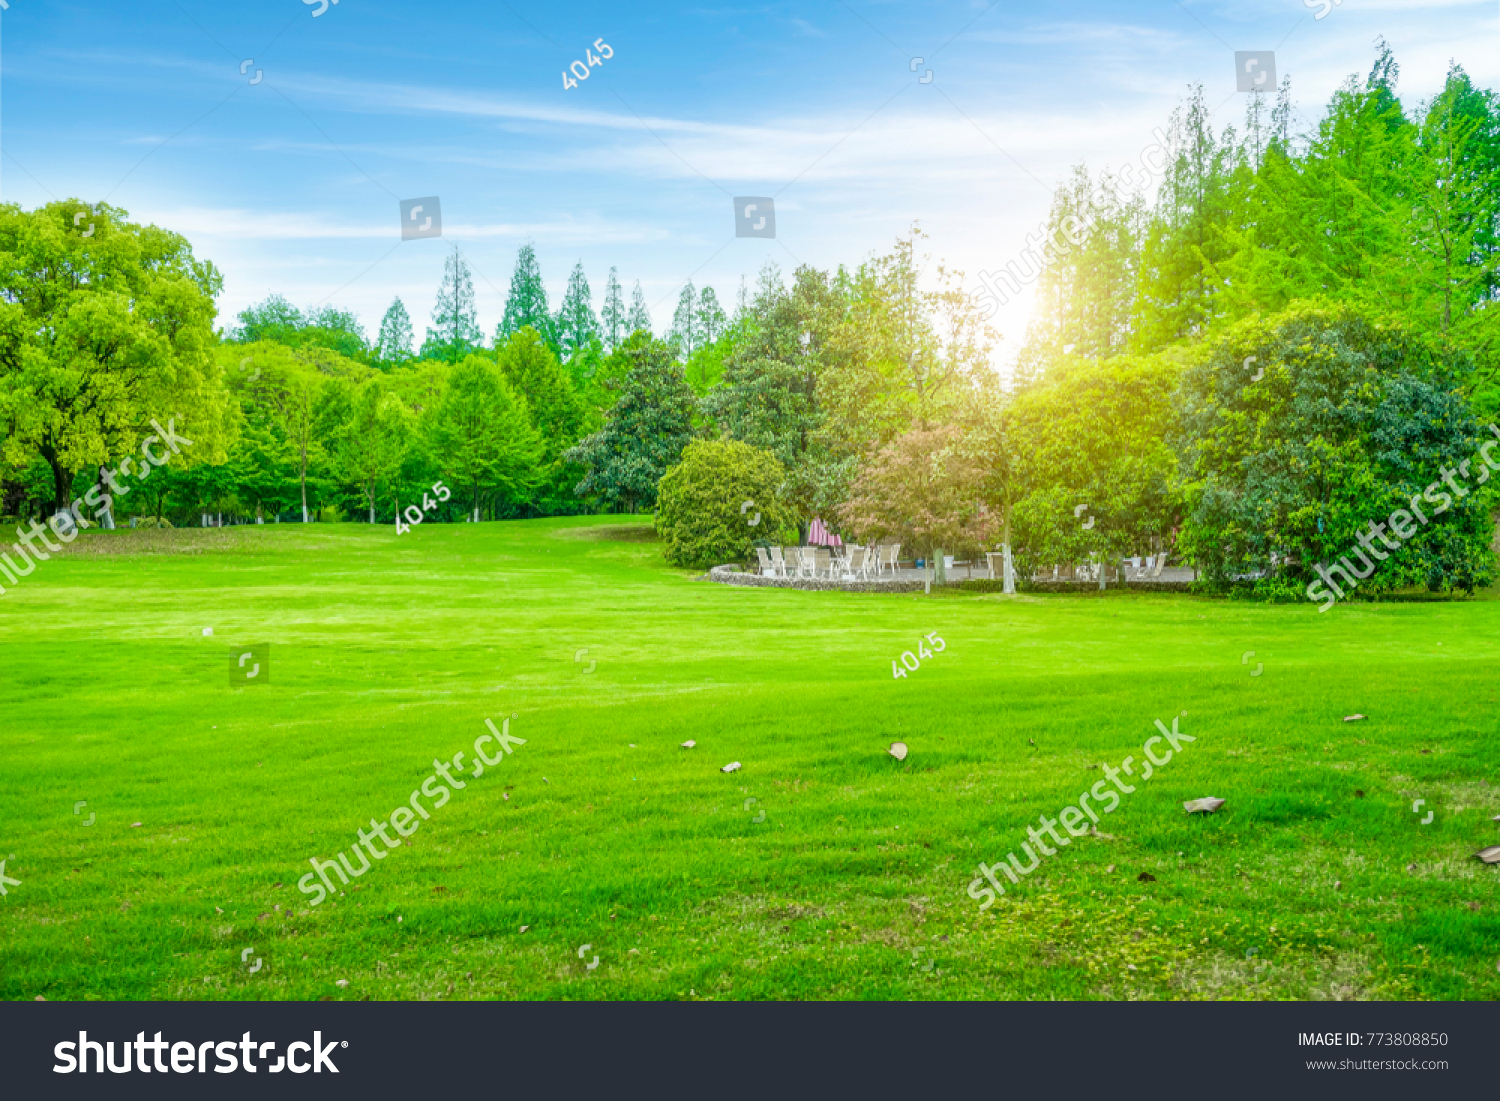 Beautiful outdoor woods and lawns #773808850